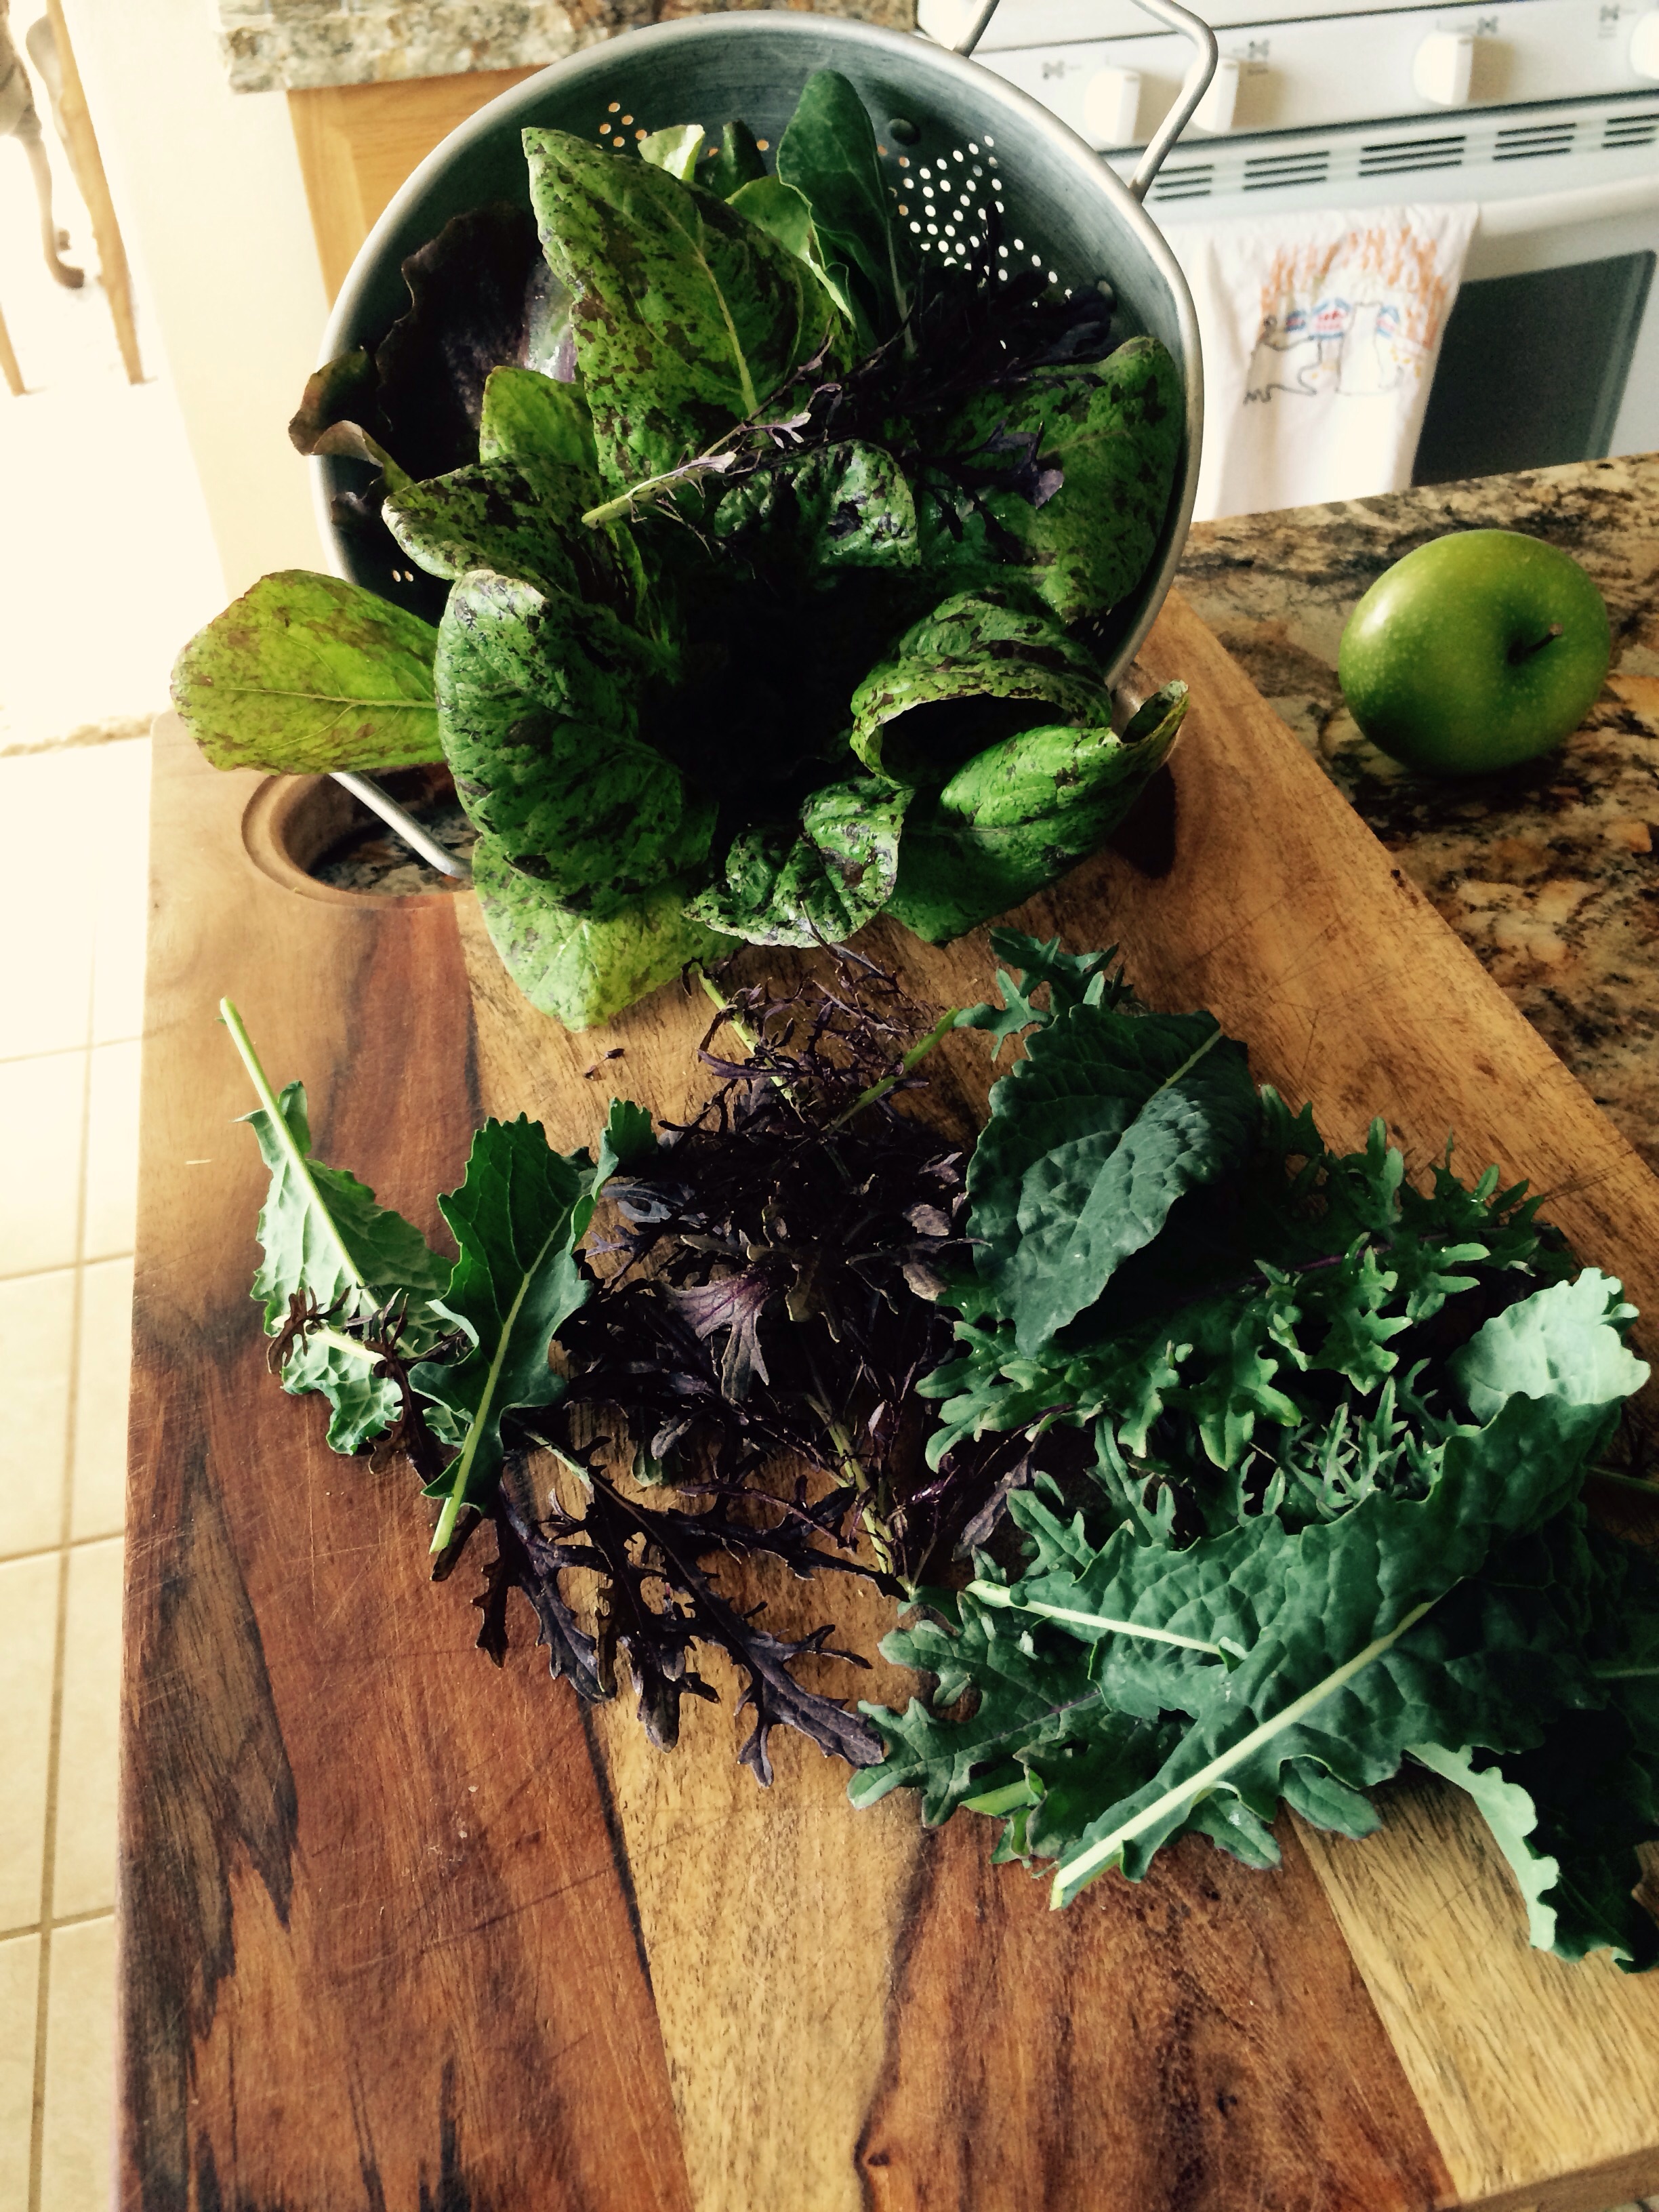 There is nothing better than fresh flavorful farm greens